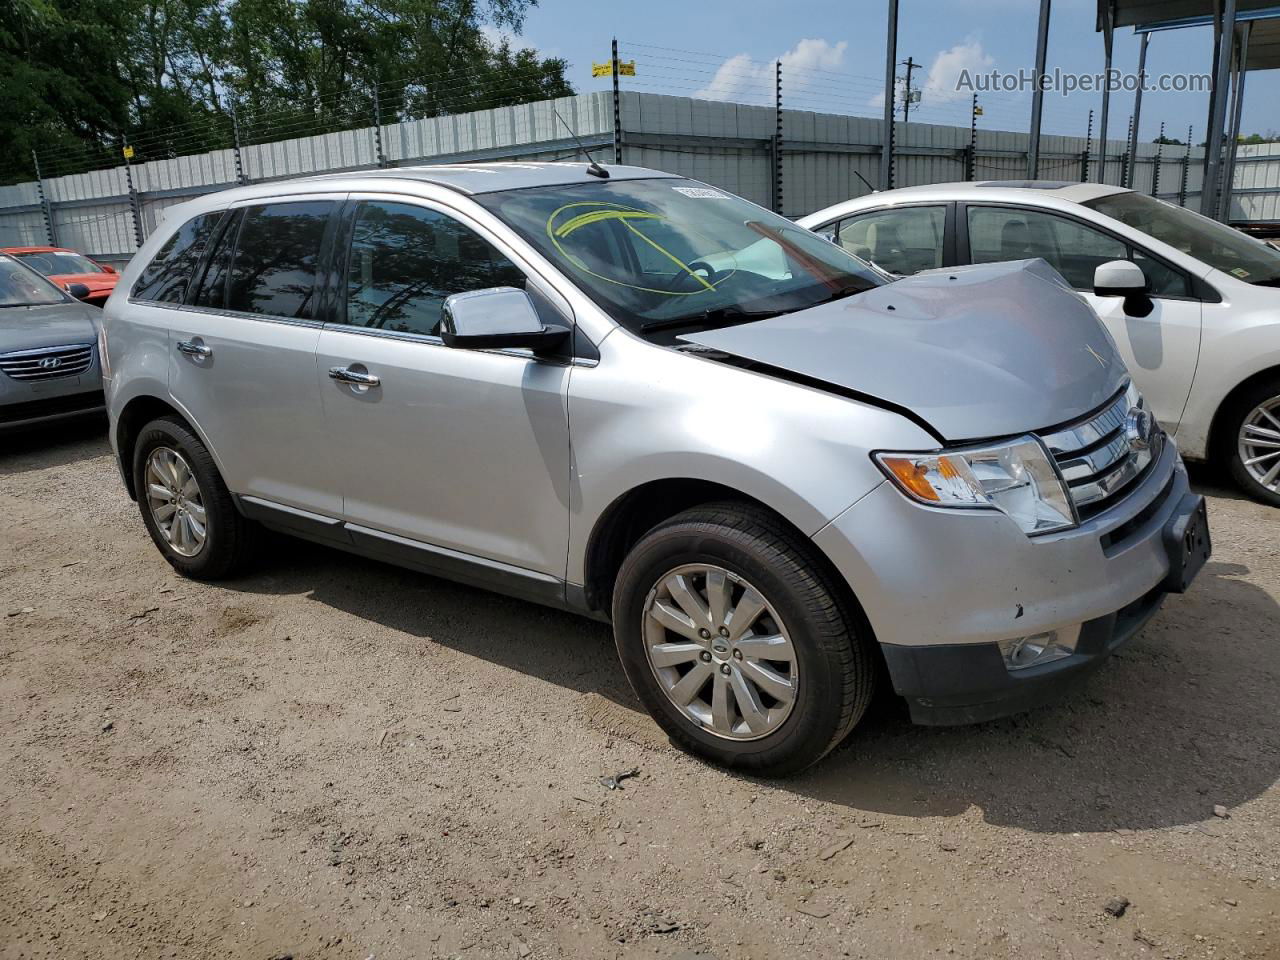 2010 Ford Edge Limited Silver vin: 2FMDK3KC9ABA08940